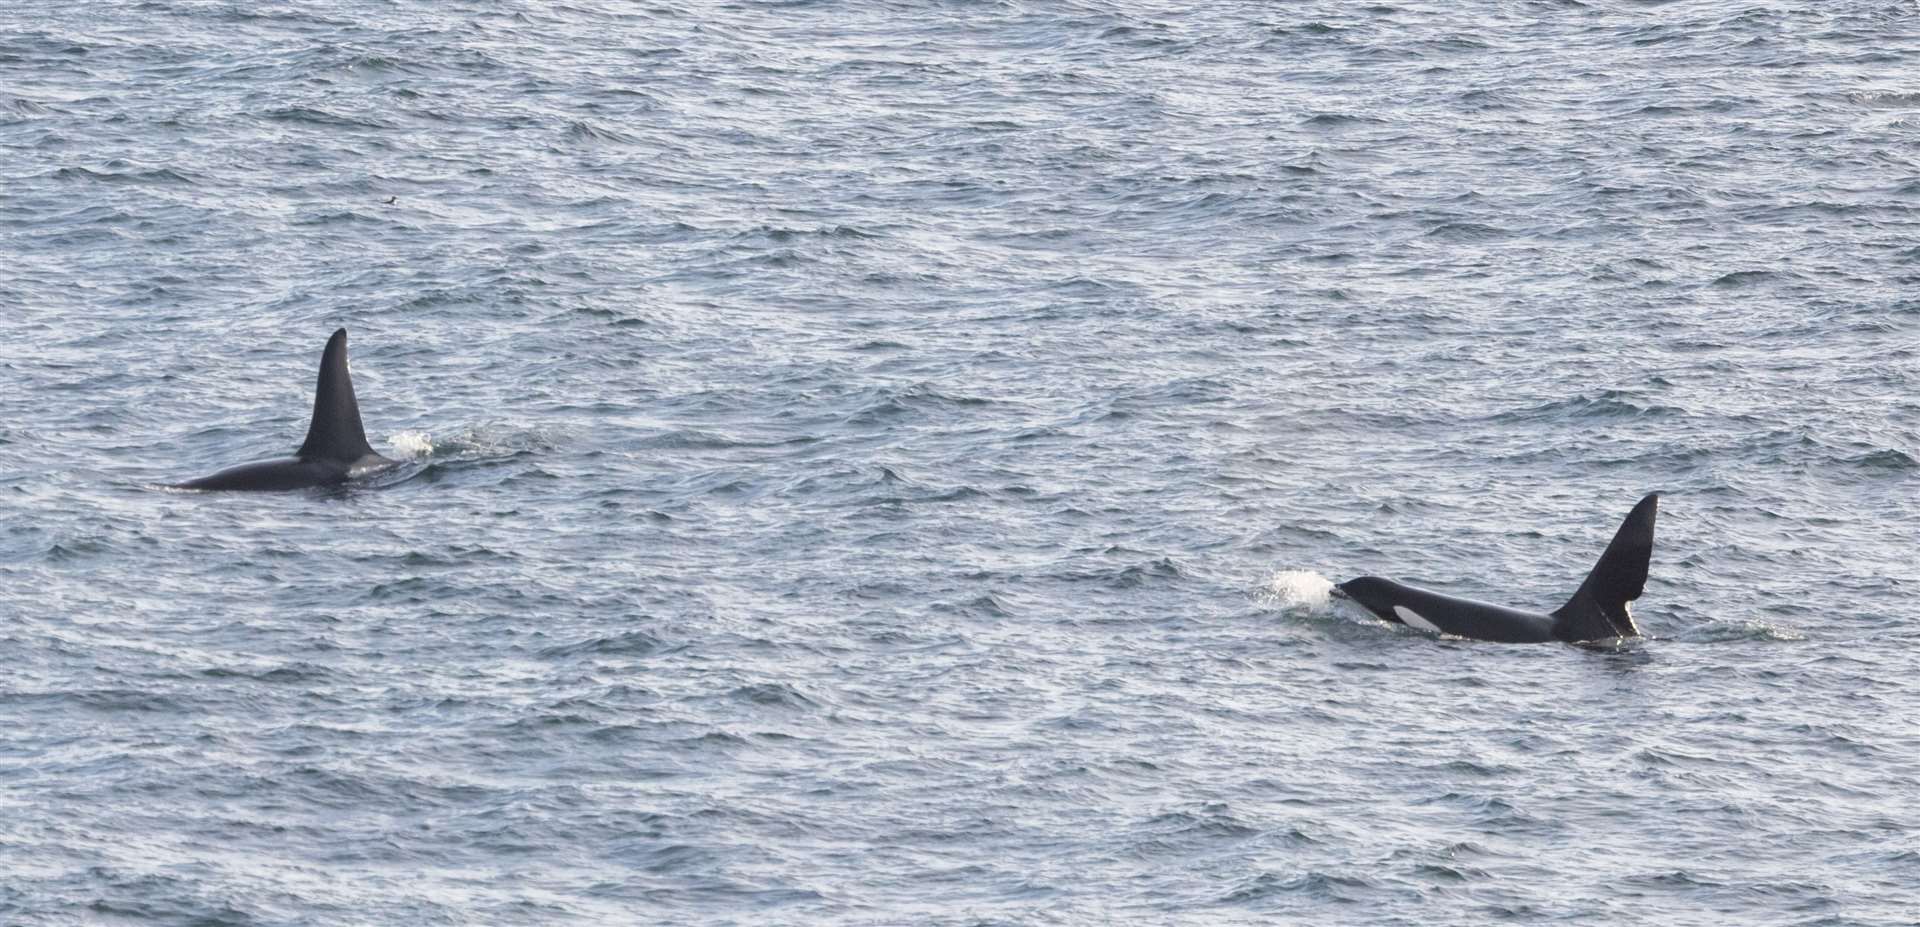 Aquarius and John Coe passing Sarclet on Thursday. John Coe has an unmistakable notch in his dorsal fin, meaning he can be identified much easier than most killer whales. Picture: Karen Munro